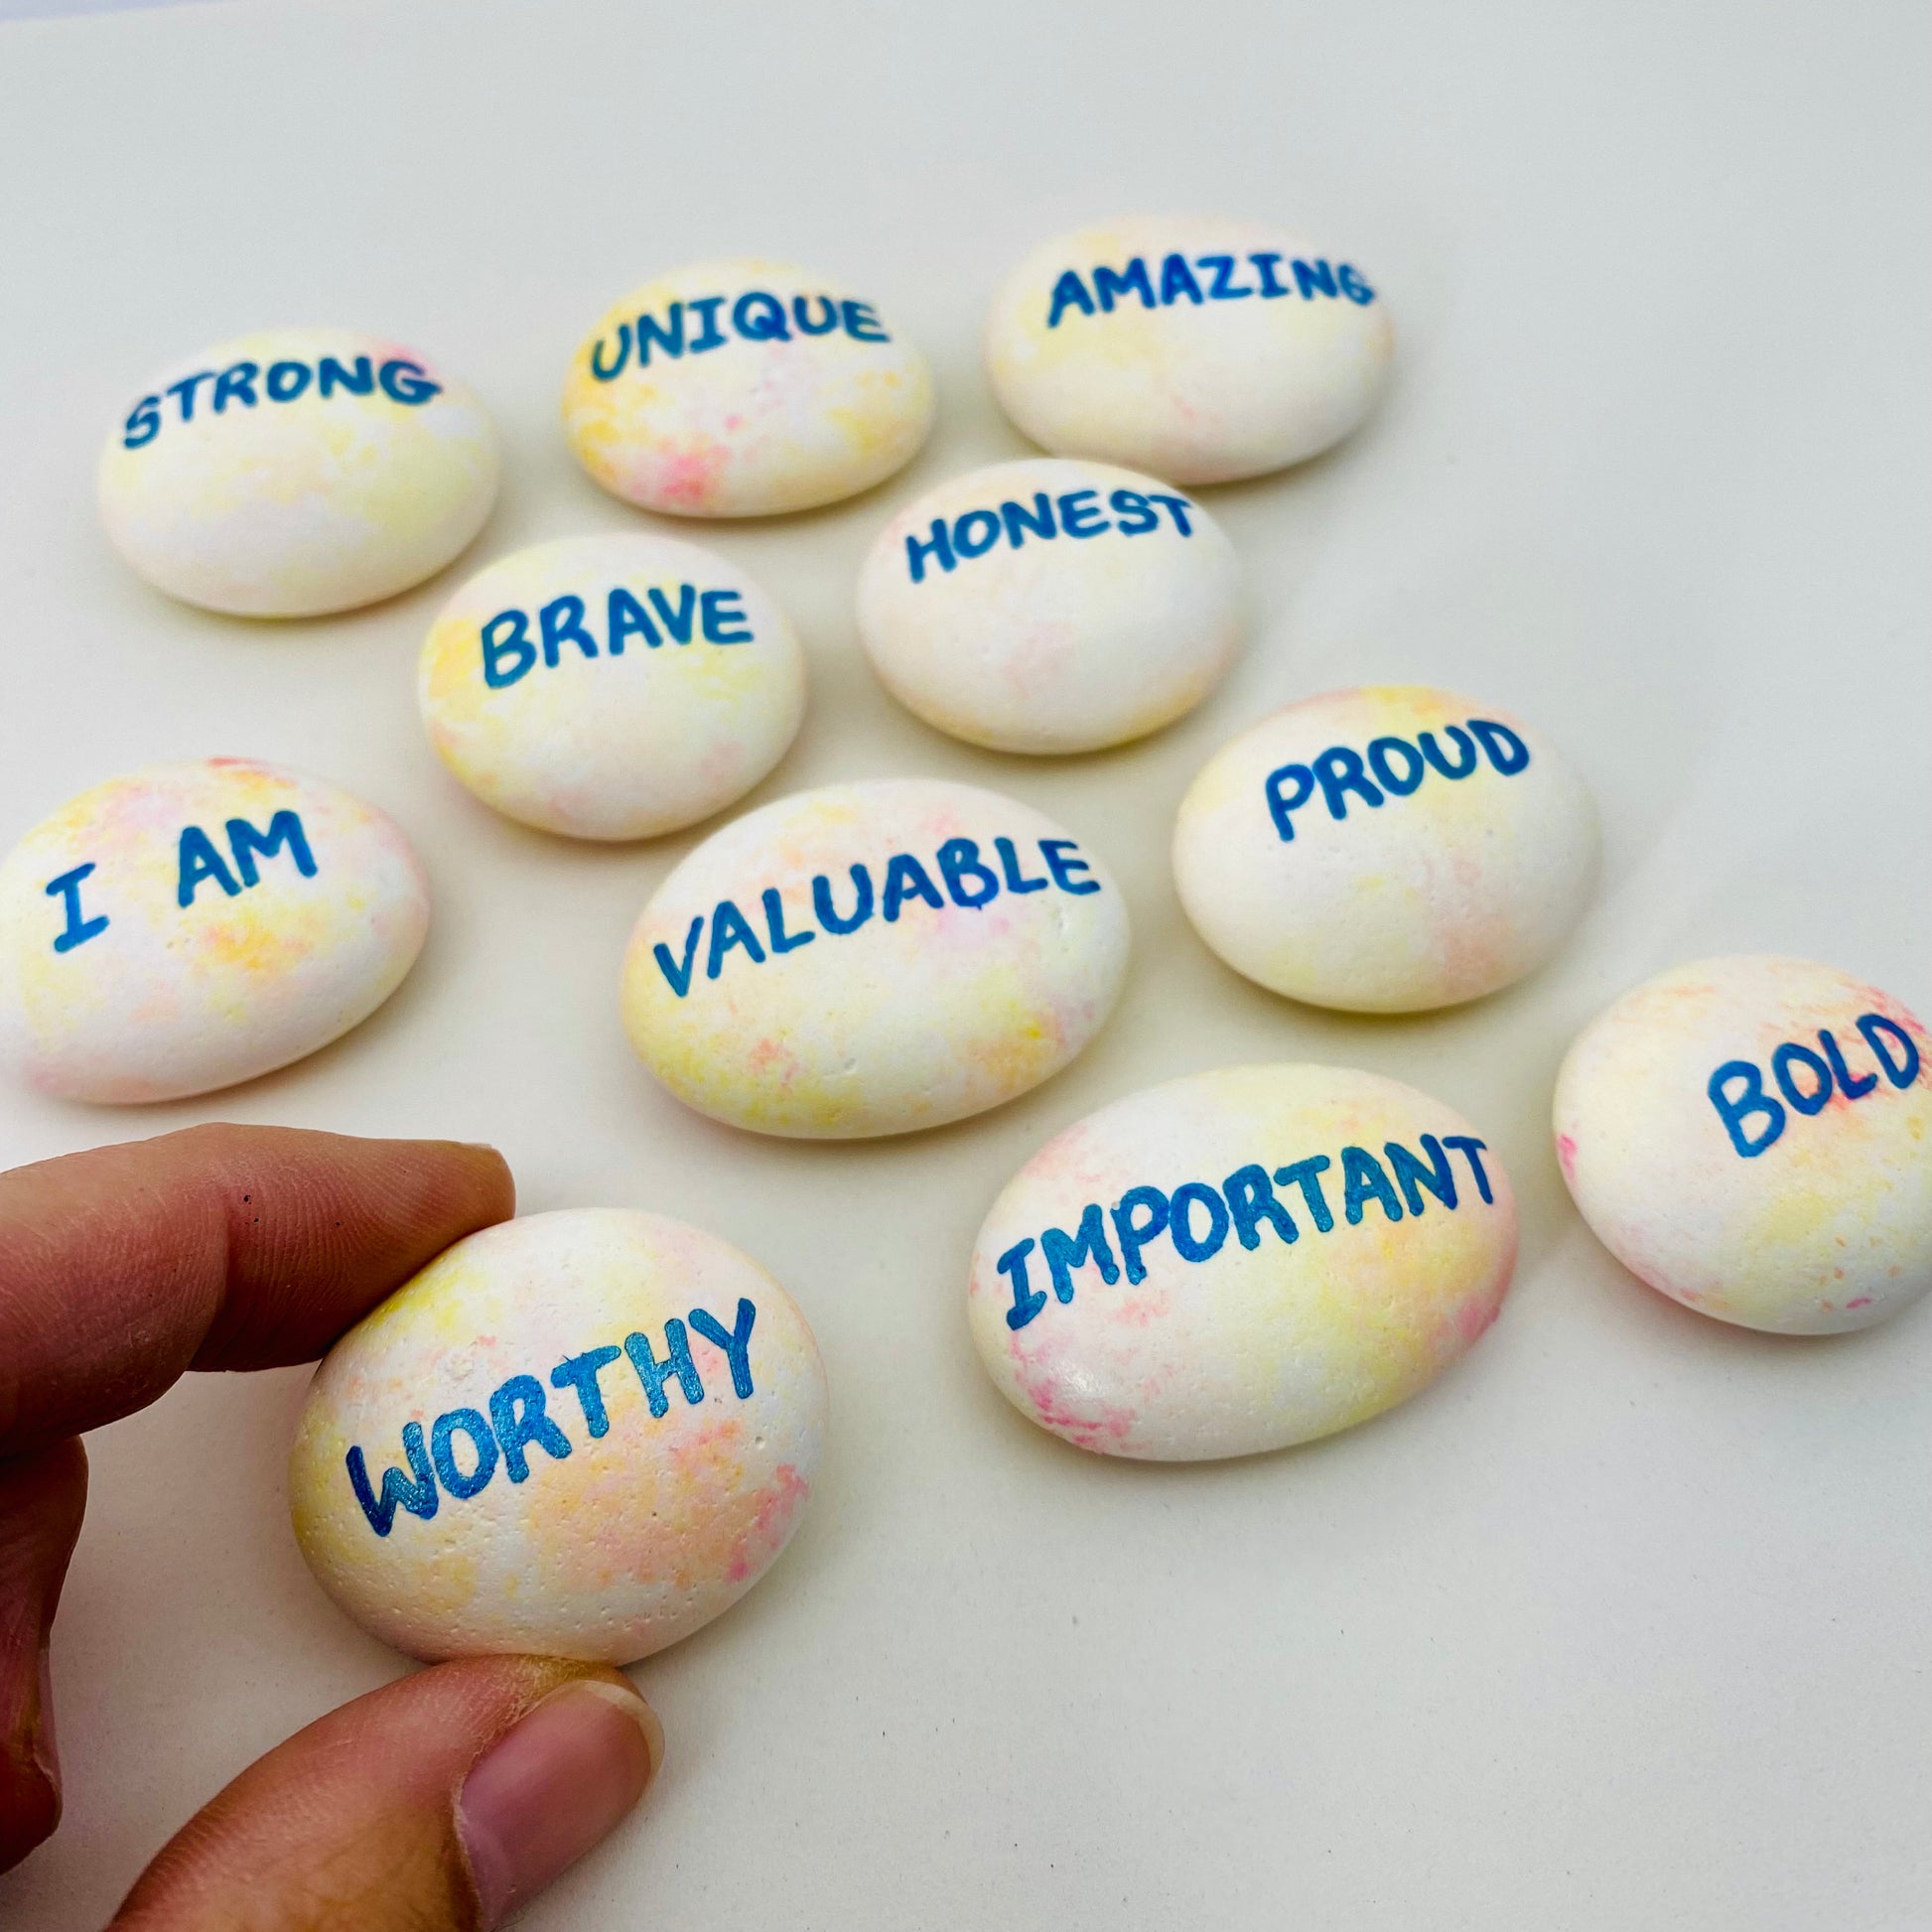 Hand painted affirmation pebbles, one being held closer to the camera with the word Worthy